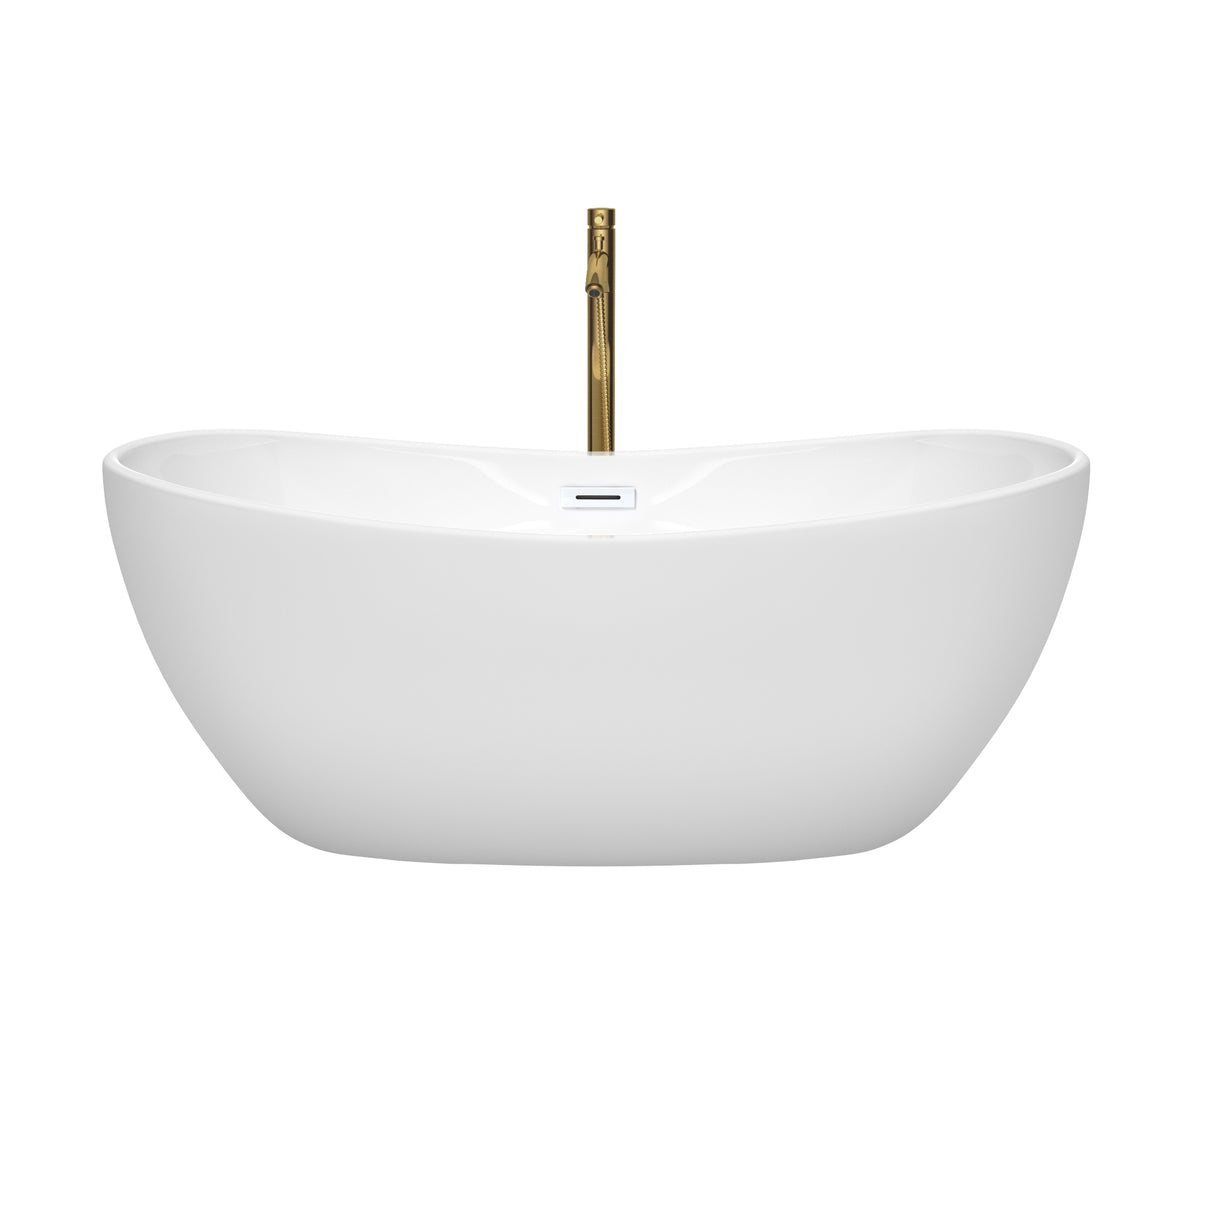 Rebecca 60 Inch Freestanding Bathtub in White with Shiny White Trim and Floor Mounted Faucet in Brushed Gold